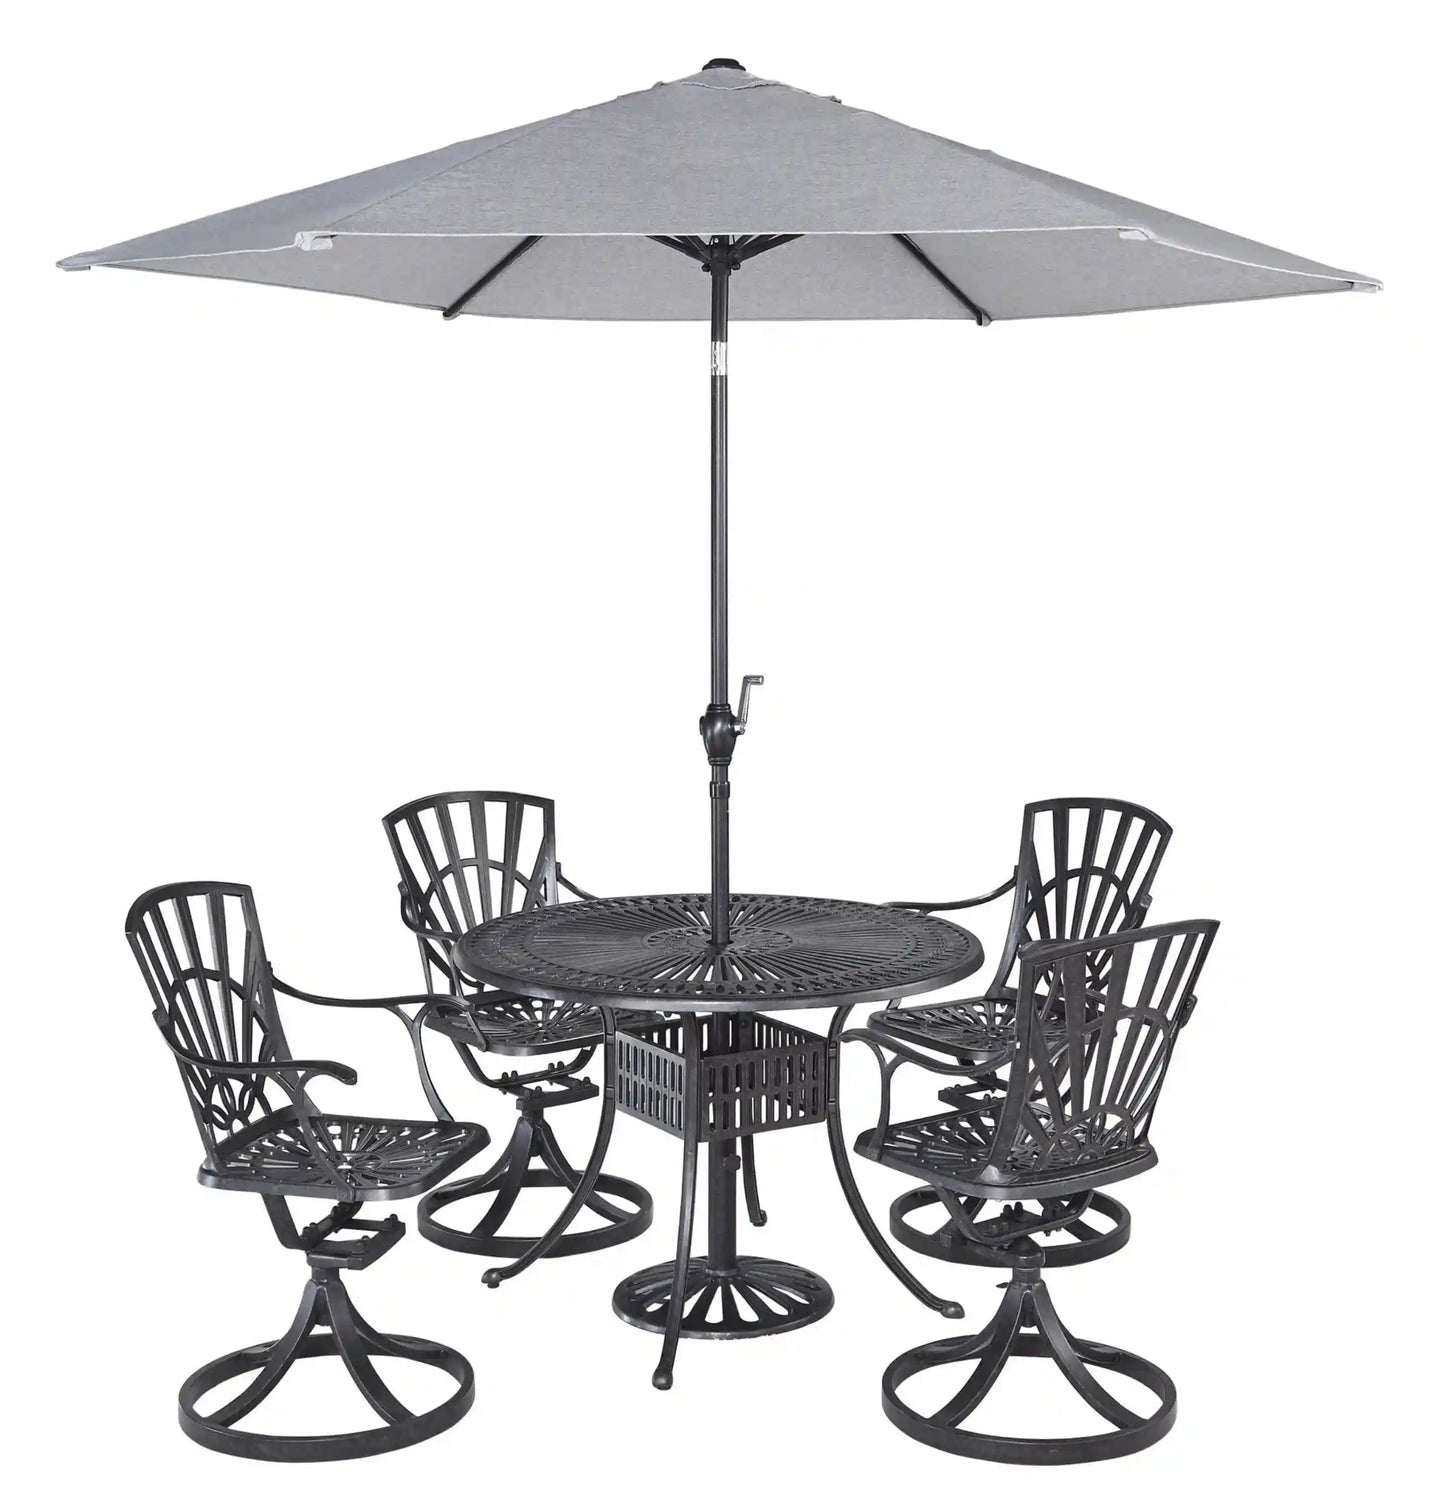 Homestyles Grenada Charcoal 6 Piece Outdoor Dining Set